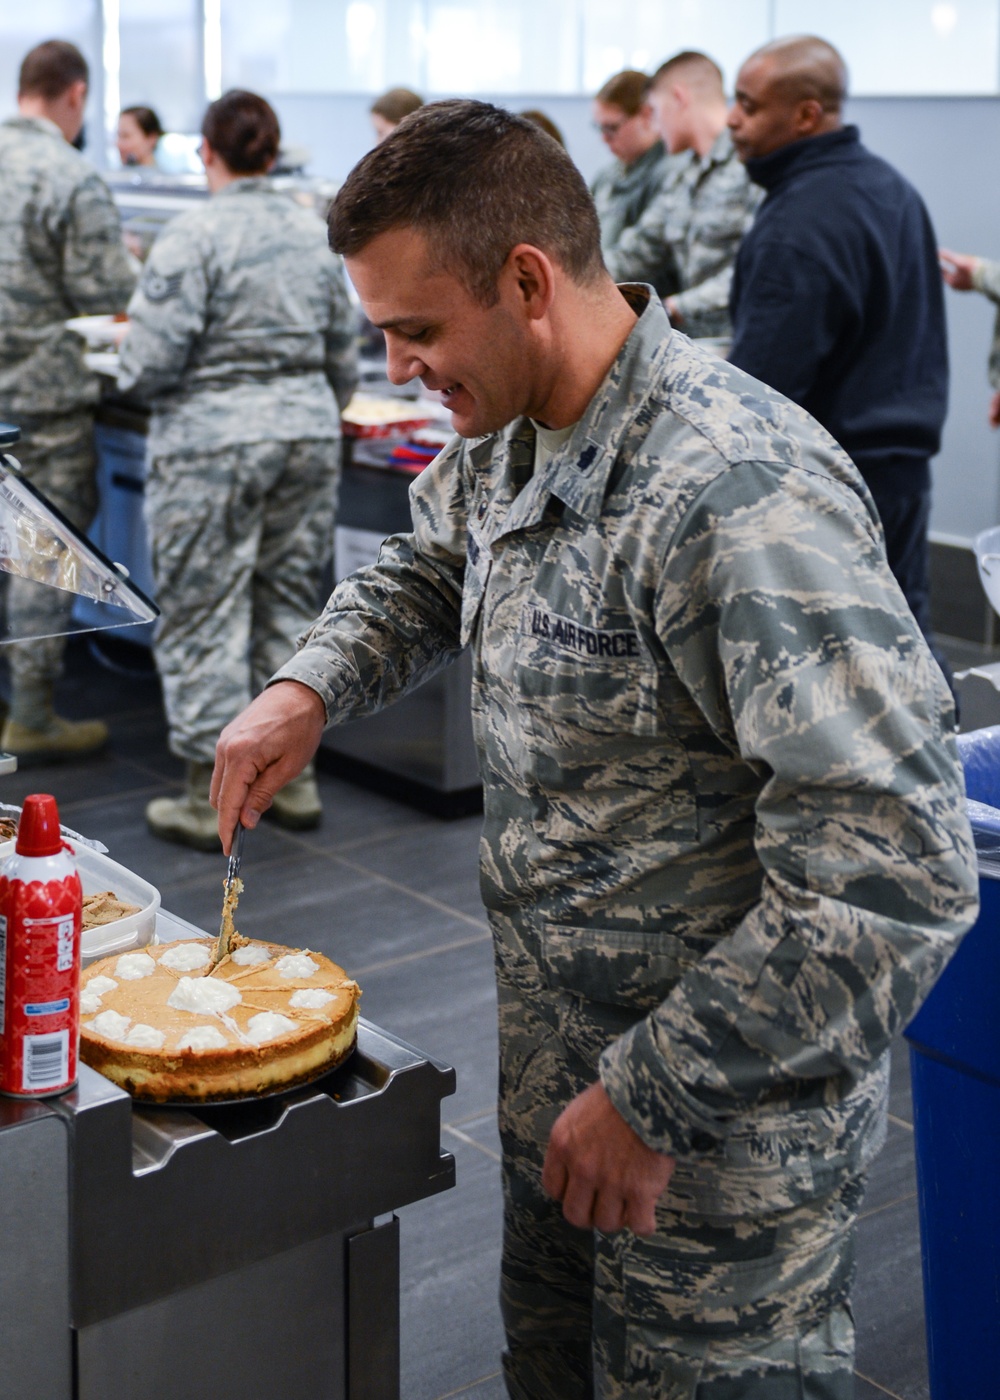 Members of the 155 Air Refueling Celebrate the Holidays